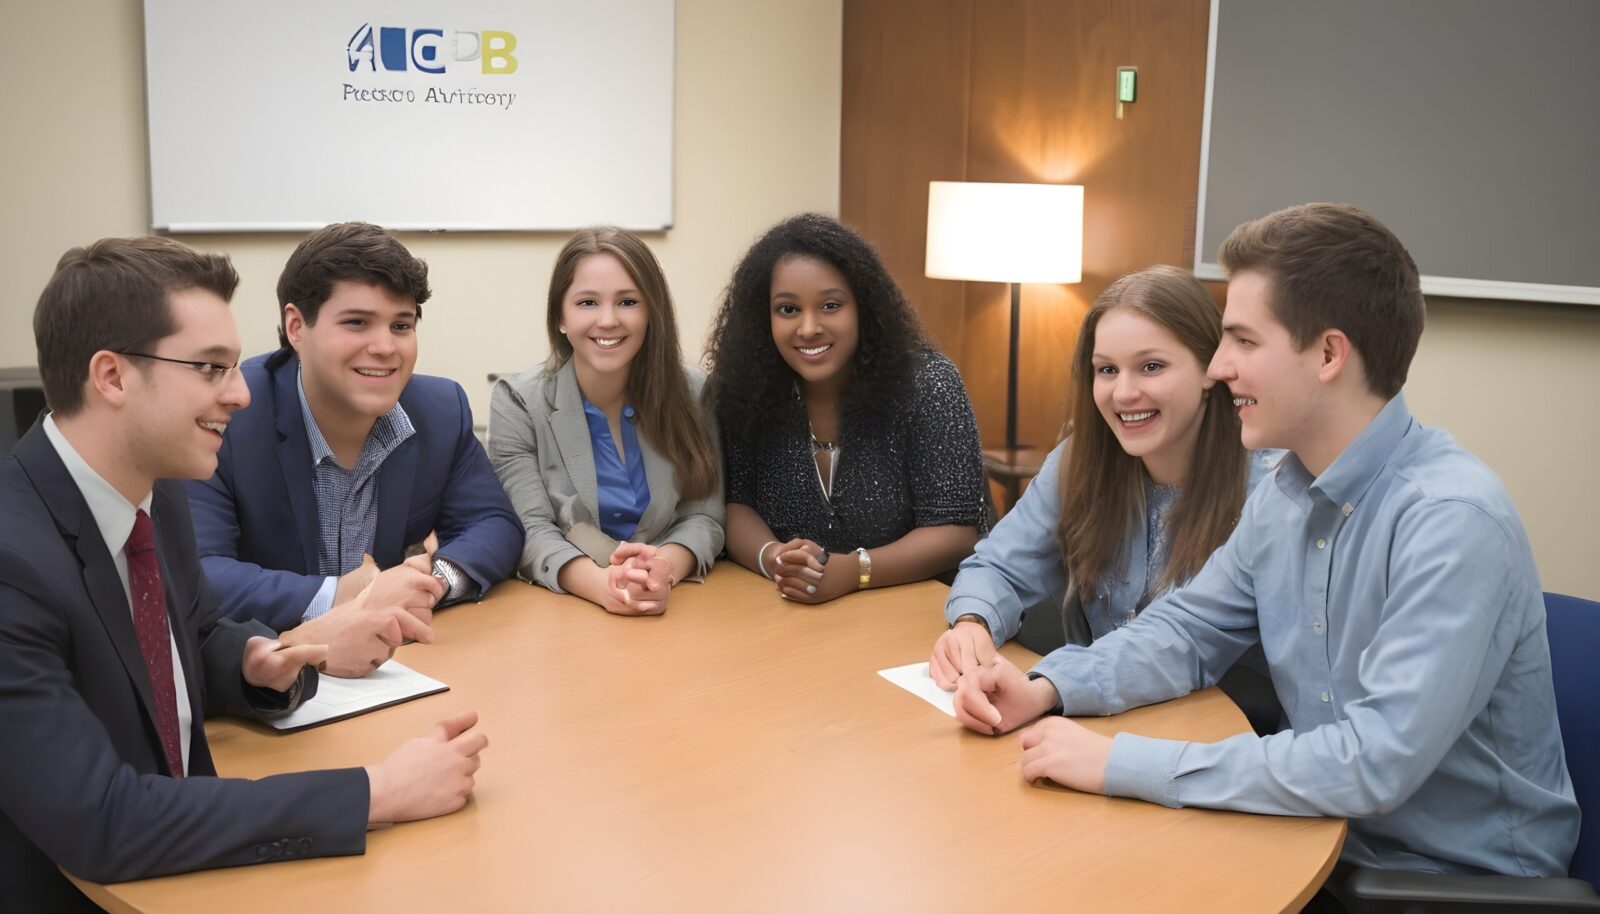 Tired of Going It Alone? AMCOB’s Peer-Advisory Groups Offer the Support You Need to Succeed